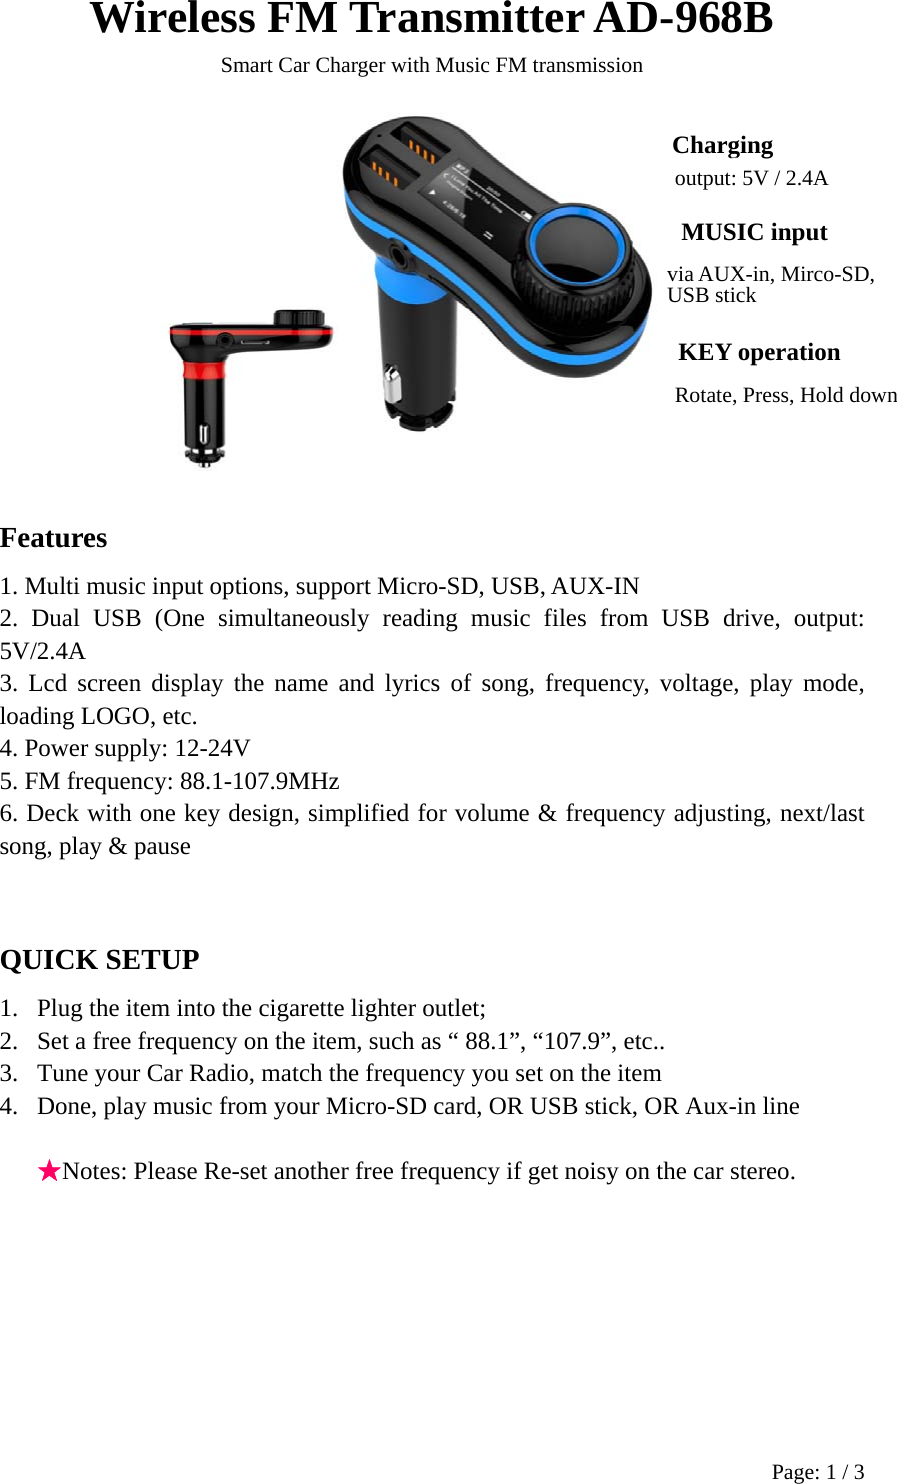 Page: 1 / 3 Wireless FM Transmitter AD-968B Smart Car Charger with Music FM transmission                     Features 1. Multi music input options, support Micro-SD, USB, AUX-IN 2. Dual USB (One simultaneously reading music files from USB drive, output: 5V/2.4A 3. Lcd screen display the name and lyrics of song, frequency, voltage, play mode, loading LOGO, etc. 4. Power supply: 12-24V 5. FM frequency: 88.1-107.9MHz 6. Deck with one key design, simplified for volume &amp; frequency adjusting, next/last song, play &amp; pause  QUICK SETUP 1. Plug the item into the cigarette lighter outlet; 2. Set a free frequency on the item, such as “ 88.1”, “107.9”, etc.. 3. Tune your Car Radio, match the frequency you set on the item 4. Done, play music from your Micro-SD card, OR USB stick, OR Aux-in line  ★Notes: Please Re-set another free frequency if get noisy on the car stereo.         ChargingA RGING MUSIC input  KEY operation via AUX-in, Mirco-SD,USB stick output: 5V / 2.4A Rotate, Press, Hold down